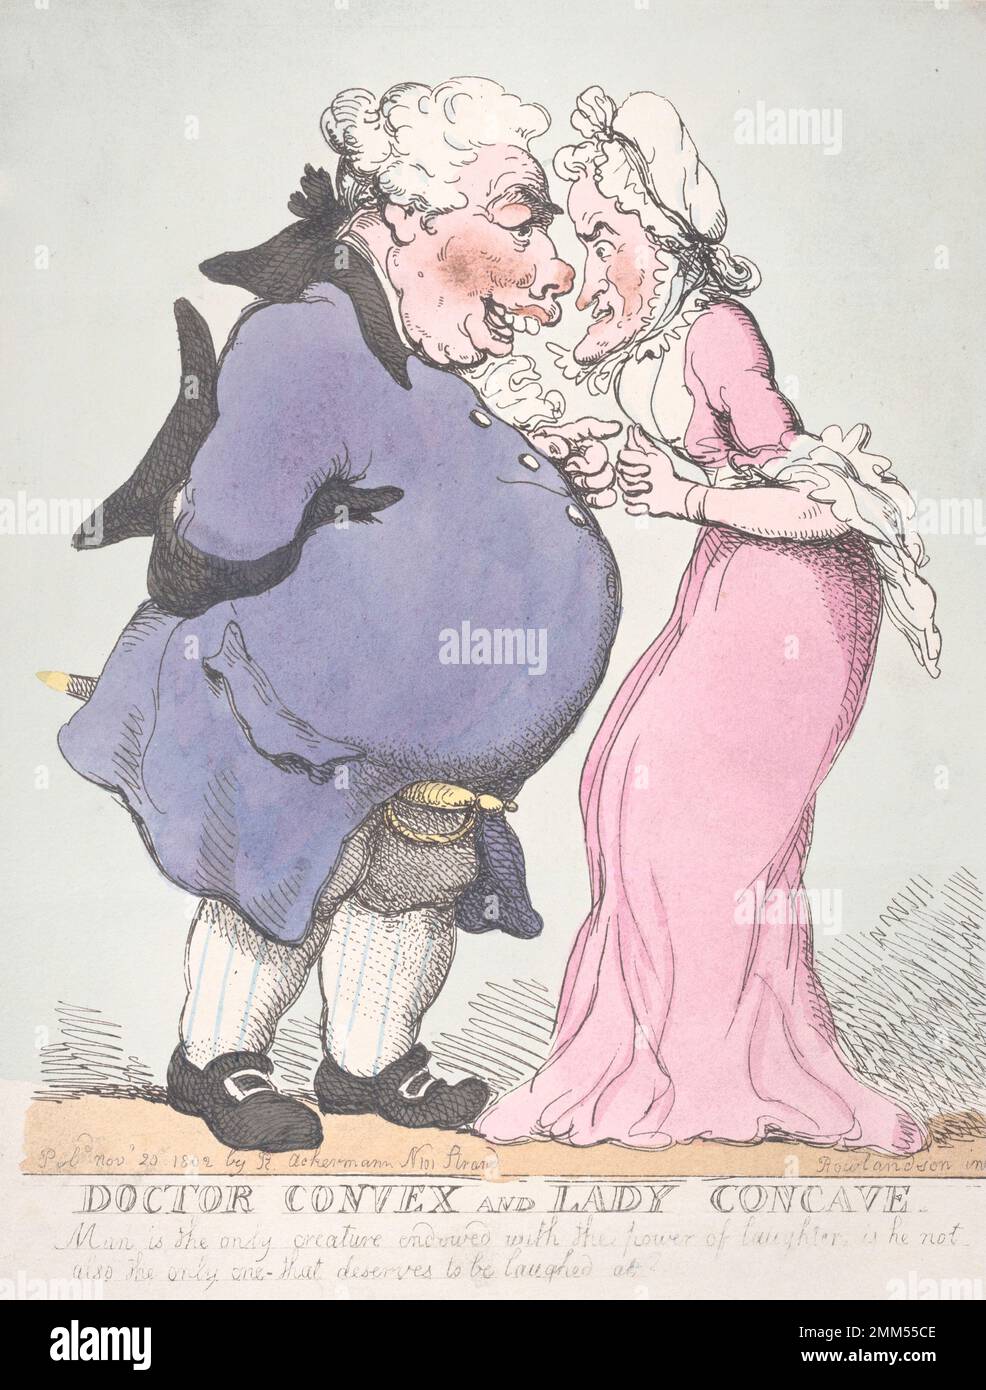 Thomas Rowlandson - Doctor Convex and Lady Concave - 1802 Stock Photo